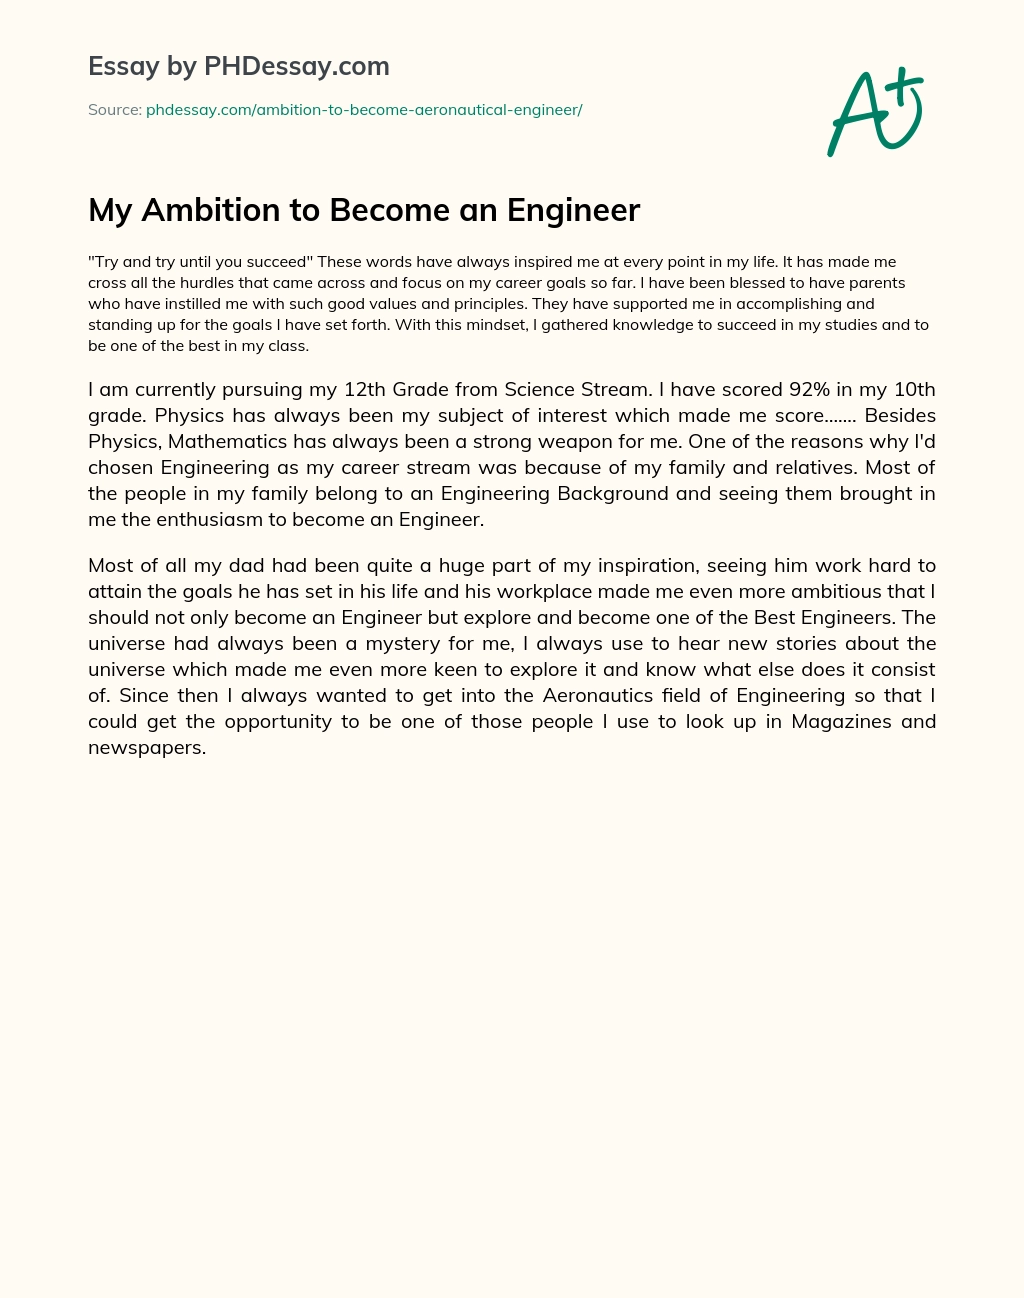 My Ambition to Become an Engineer essay